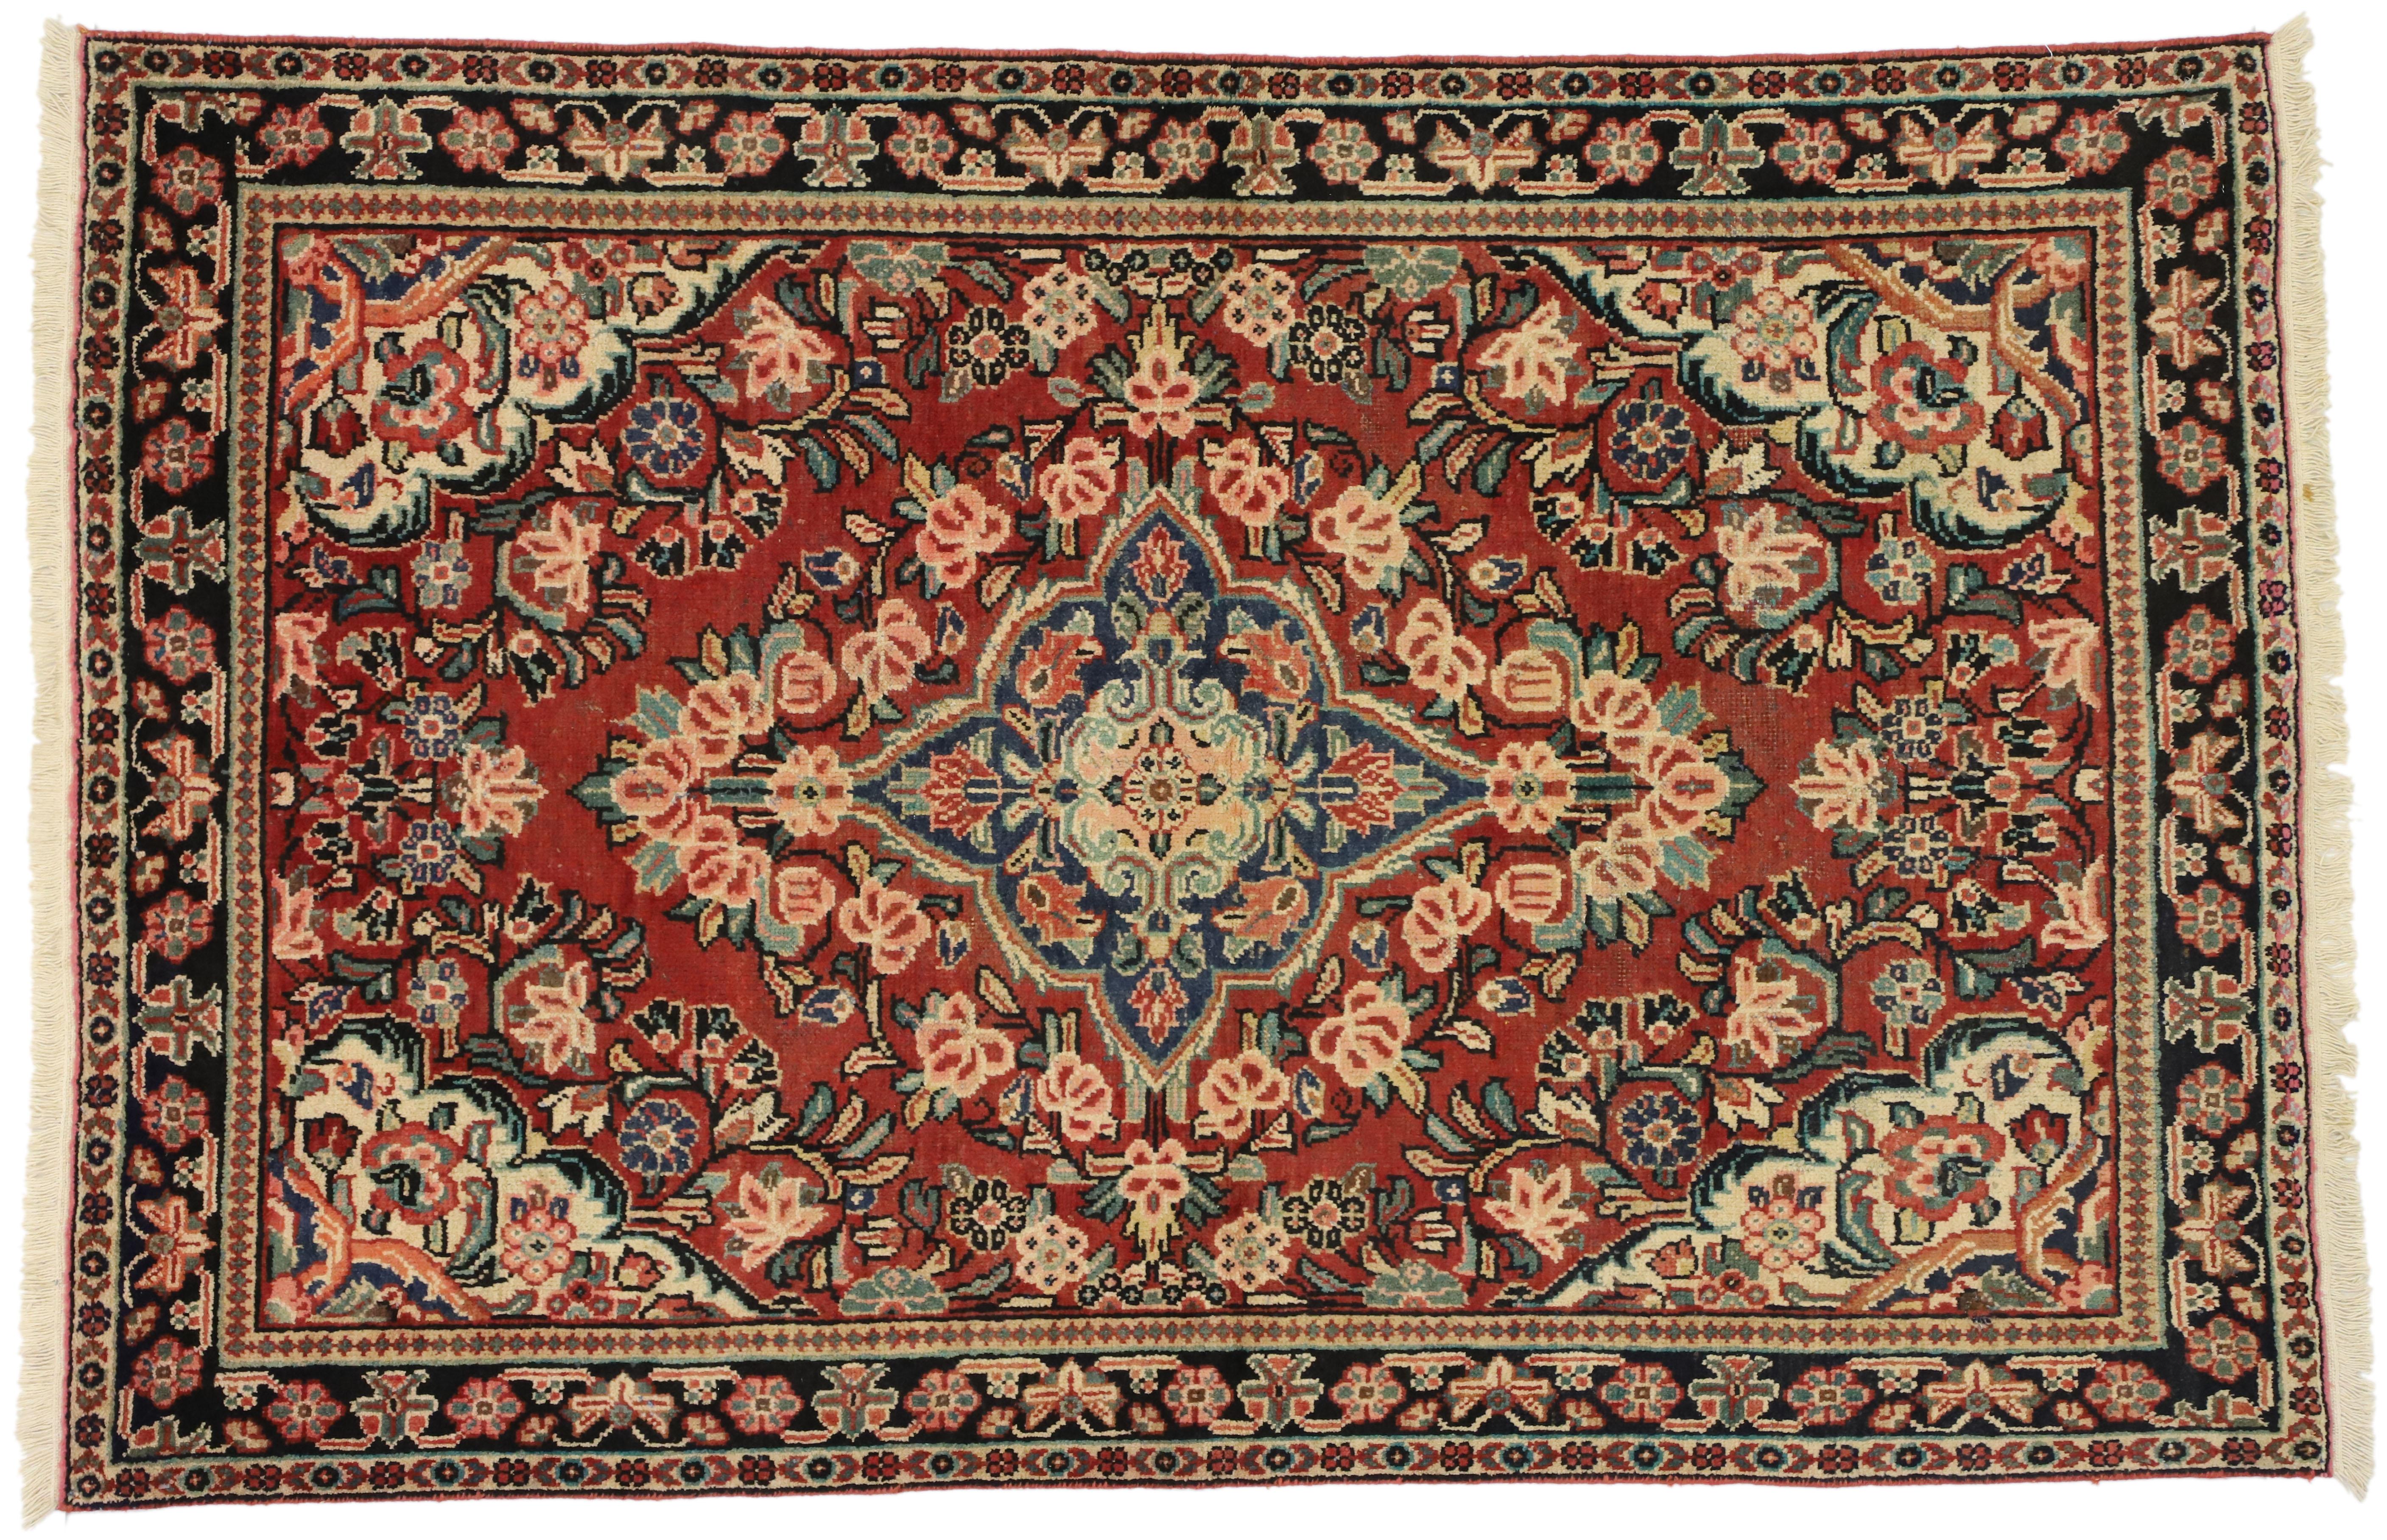 Vintage Persian Mahal Sarouk Rug with Rustic English Country Style, Entry Rug 1